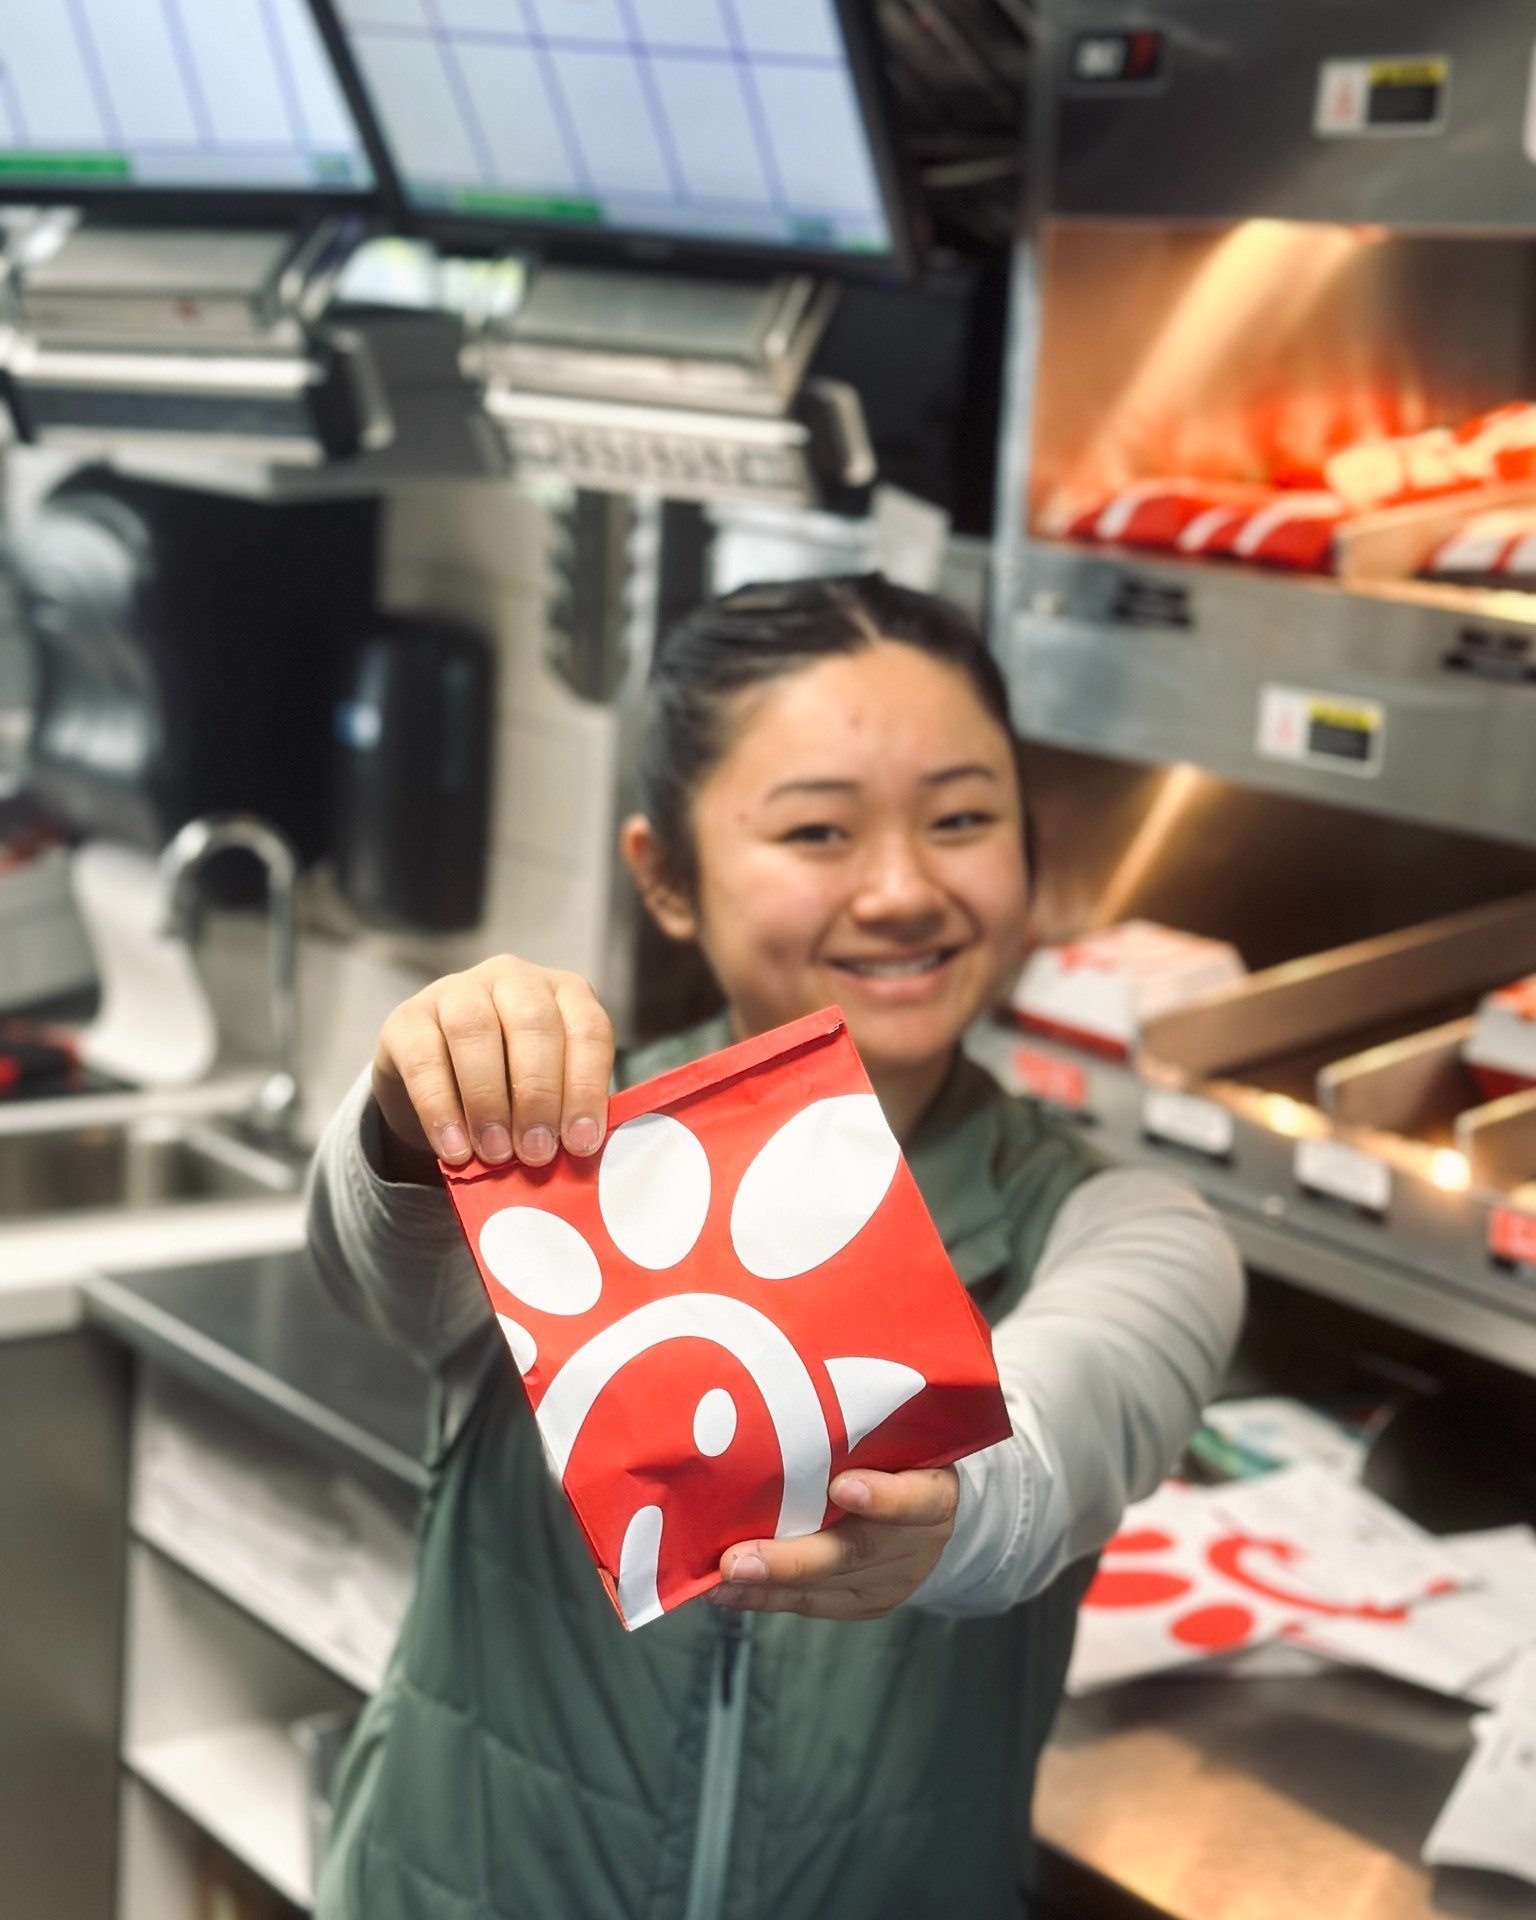 Giveaway this Friday, May 17, 6-8pm. 🥳

Place a Mobile order for pickup in our Mobile-Thru lane in the Drive-Thru, and automatically receive a Free Original Spicy Chicken Sandwich with your order. Tag your friend who you want to being to Chick-fil-A